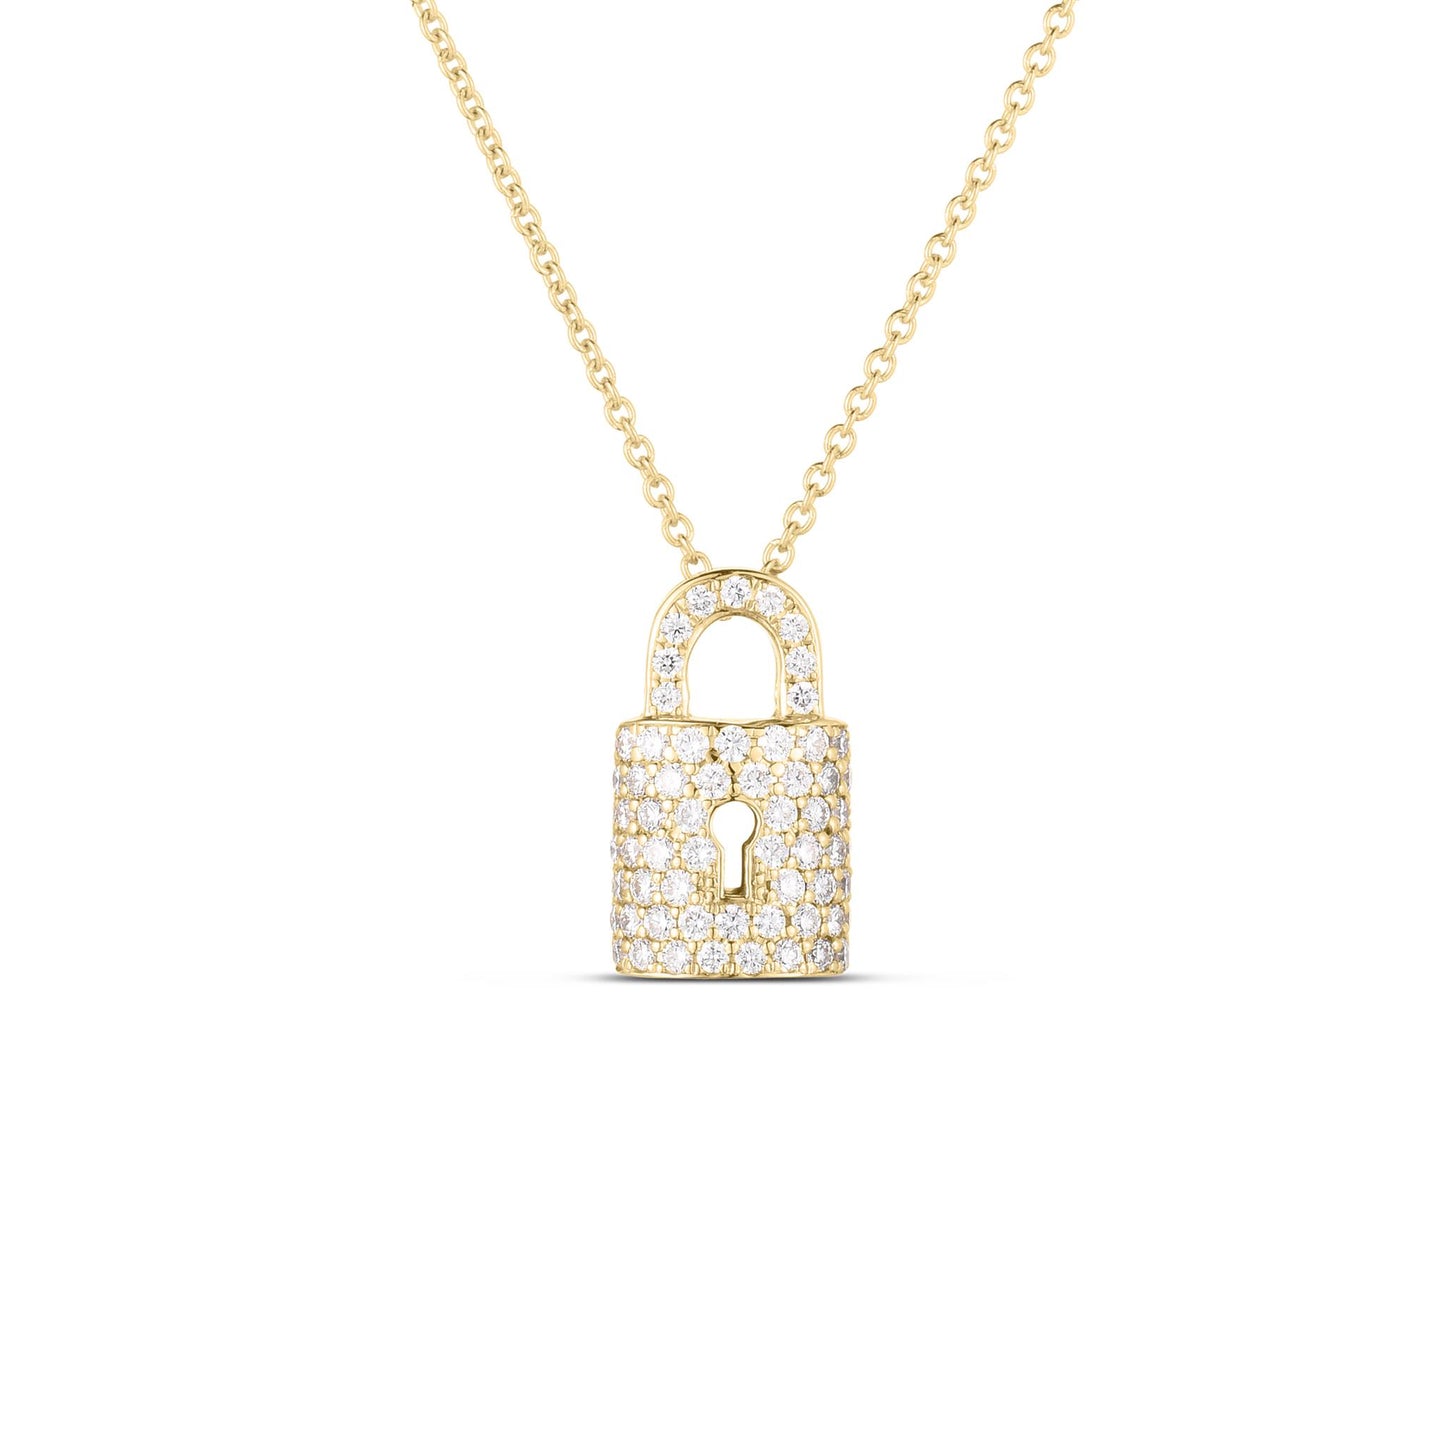 Roberot Coin Diamond Lock Charm Necklace - Yellow Gold